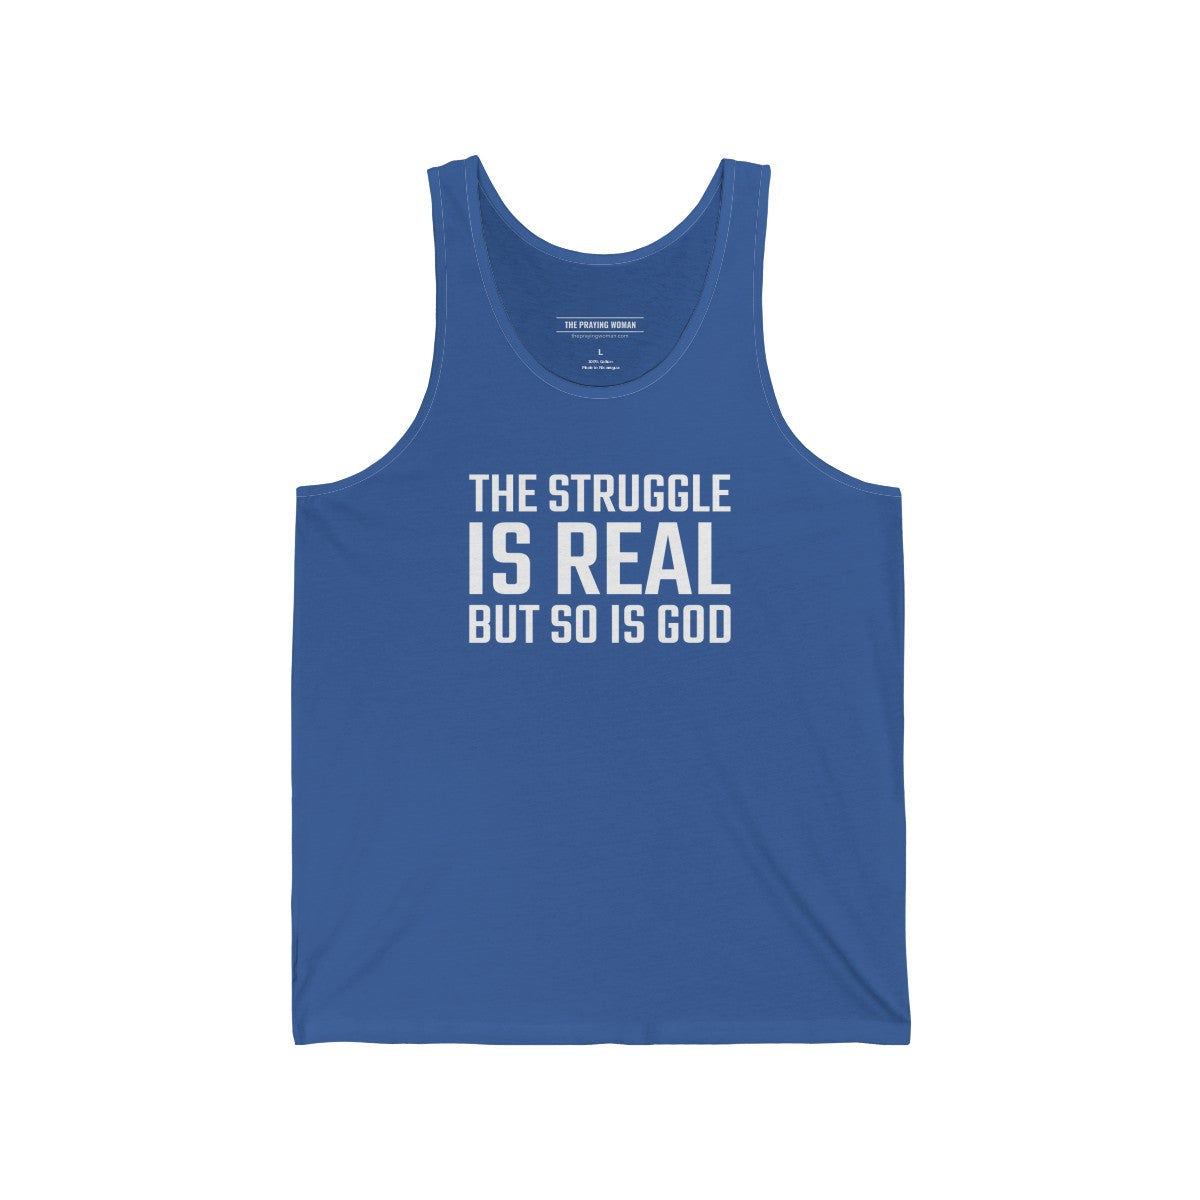 The Struggle is Real Tank Top